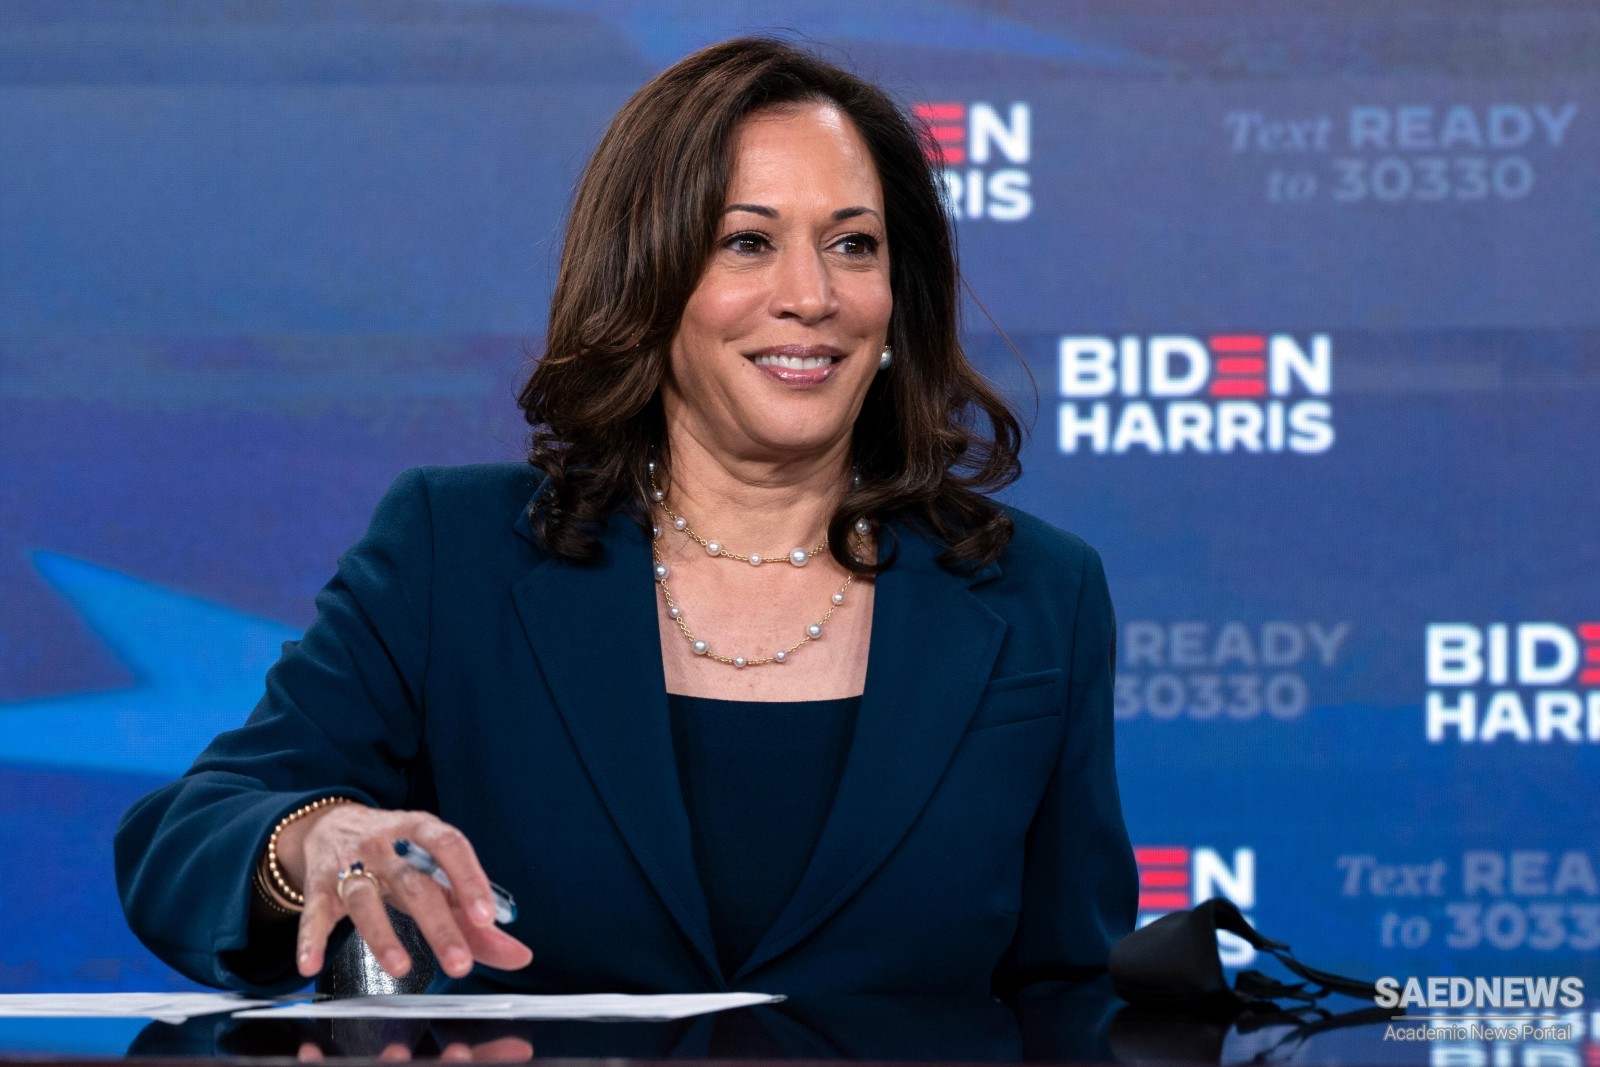 Vice-President-Elect Kamala Harris First Woman of Color in the US Making Presidential History